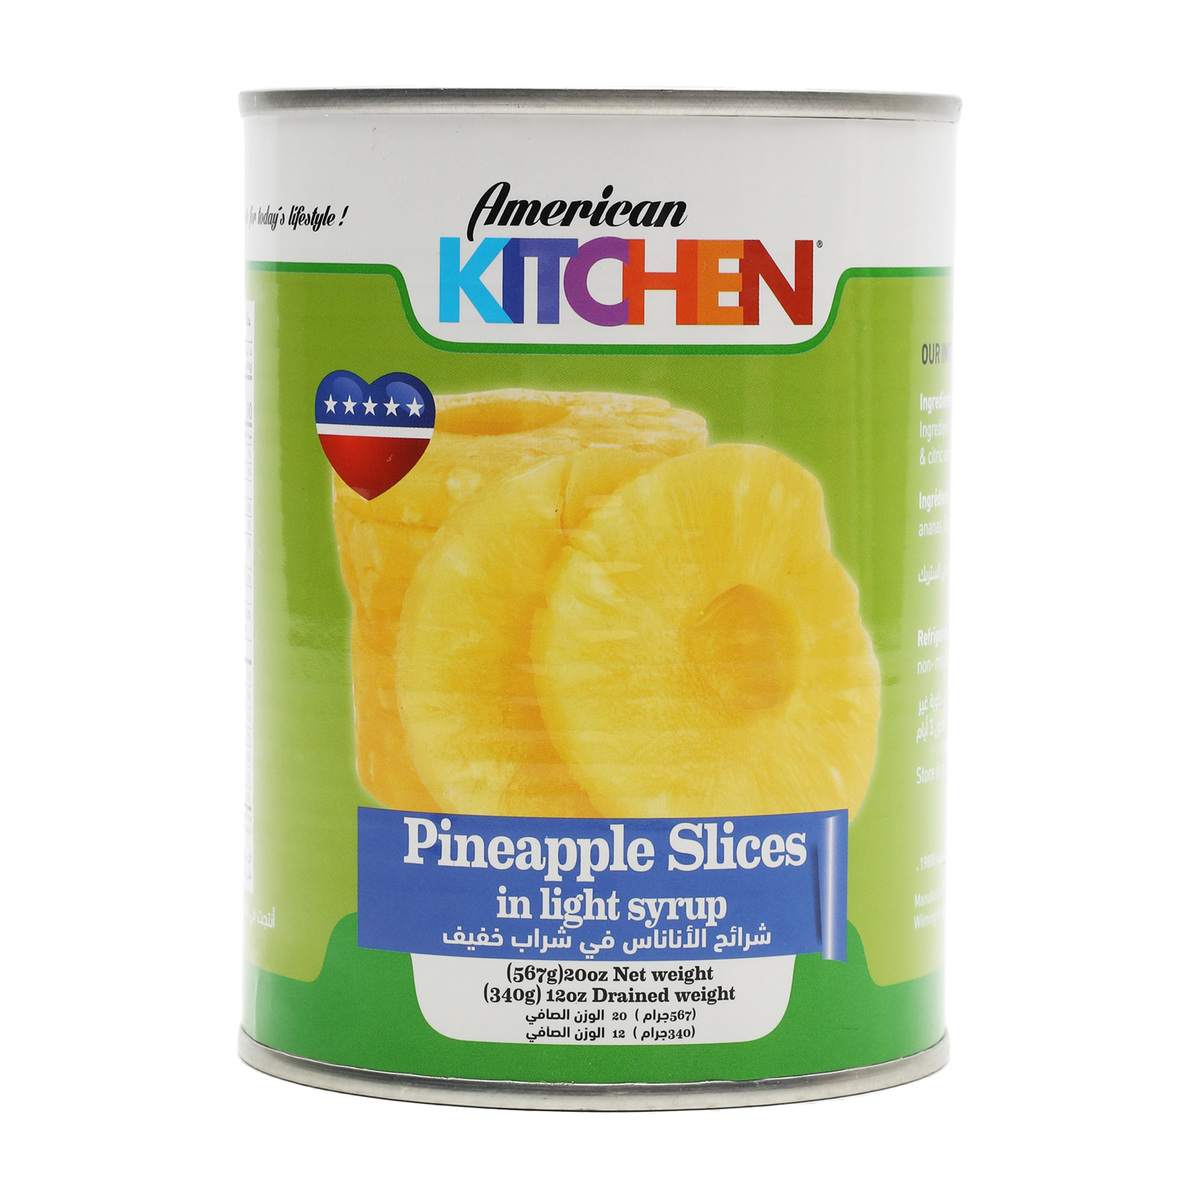 American Kitchen Pineapple Slices In Light Syrup 567g